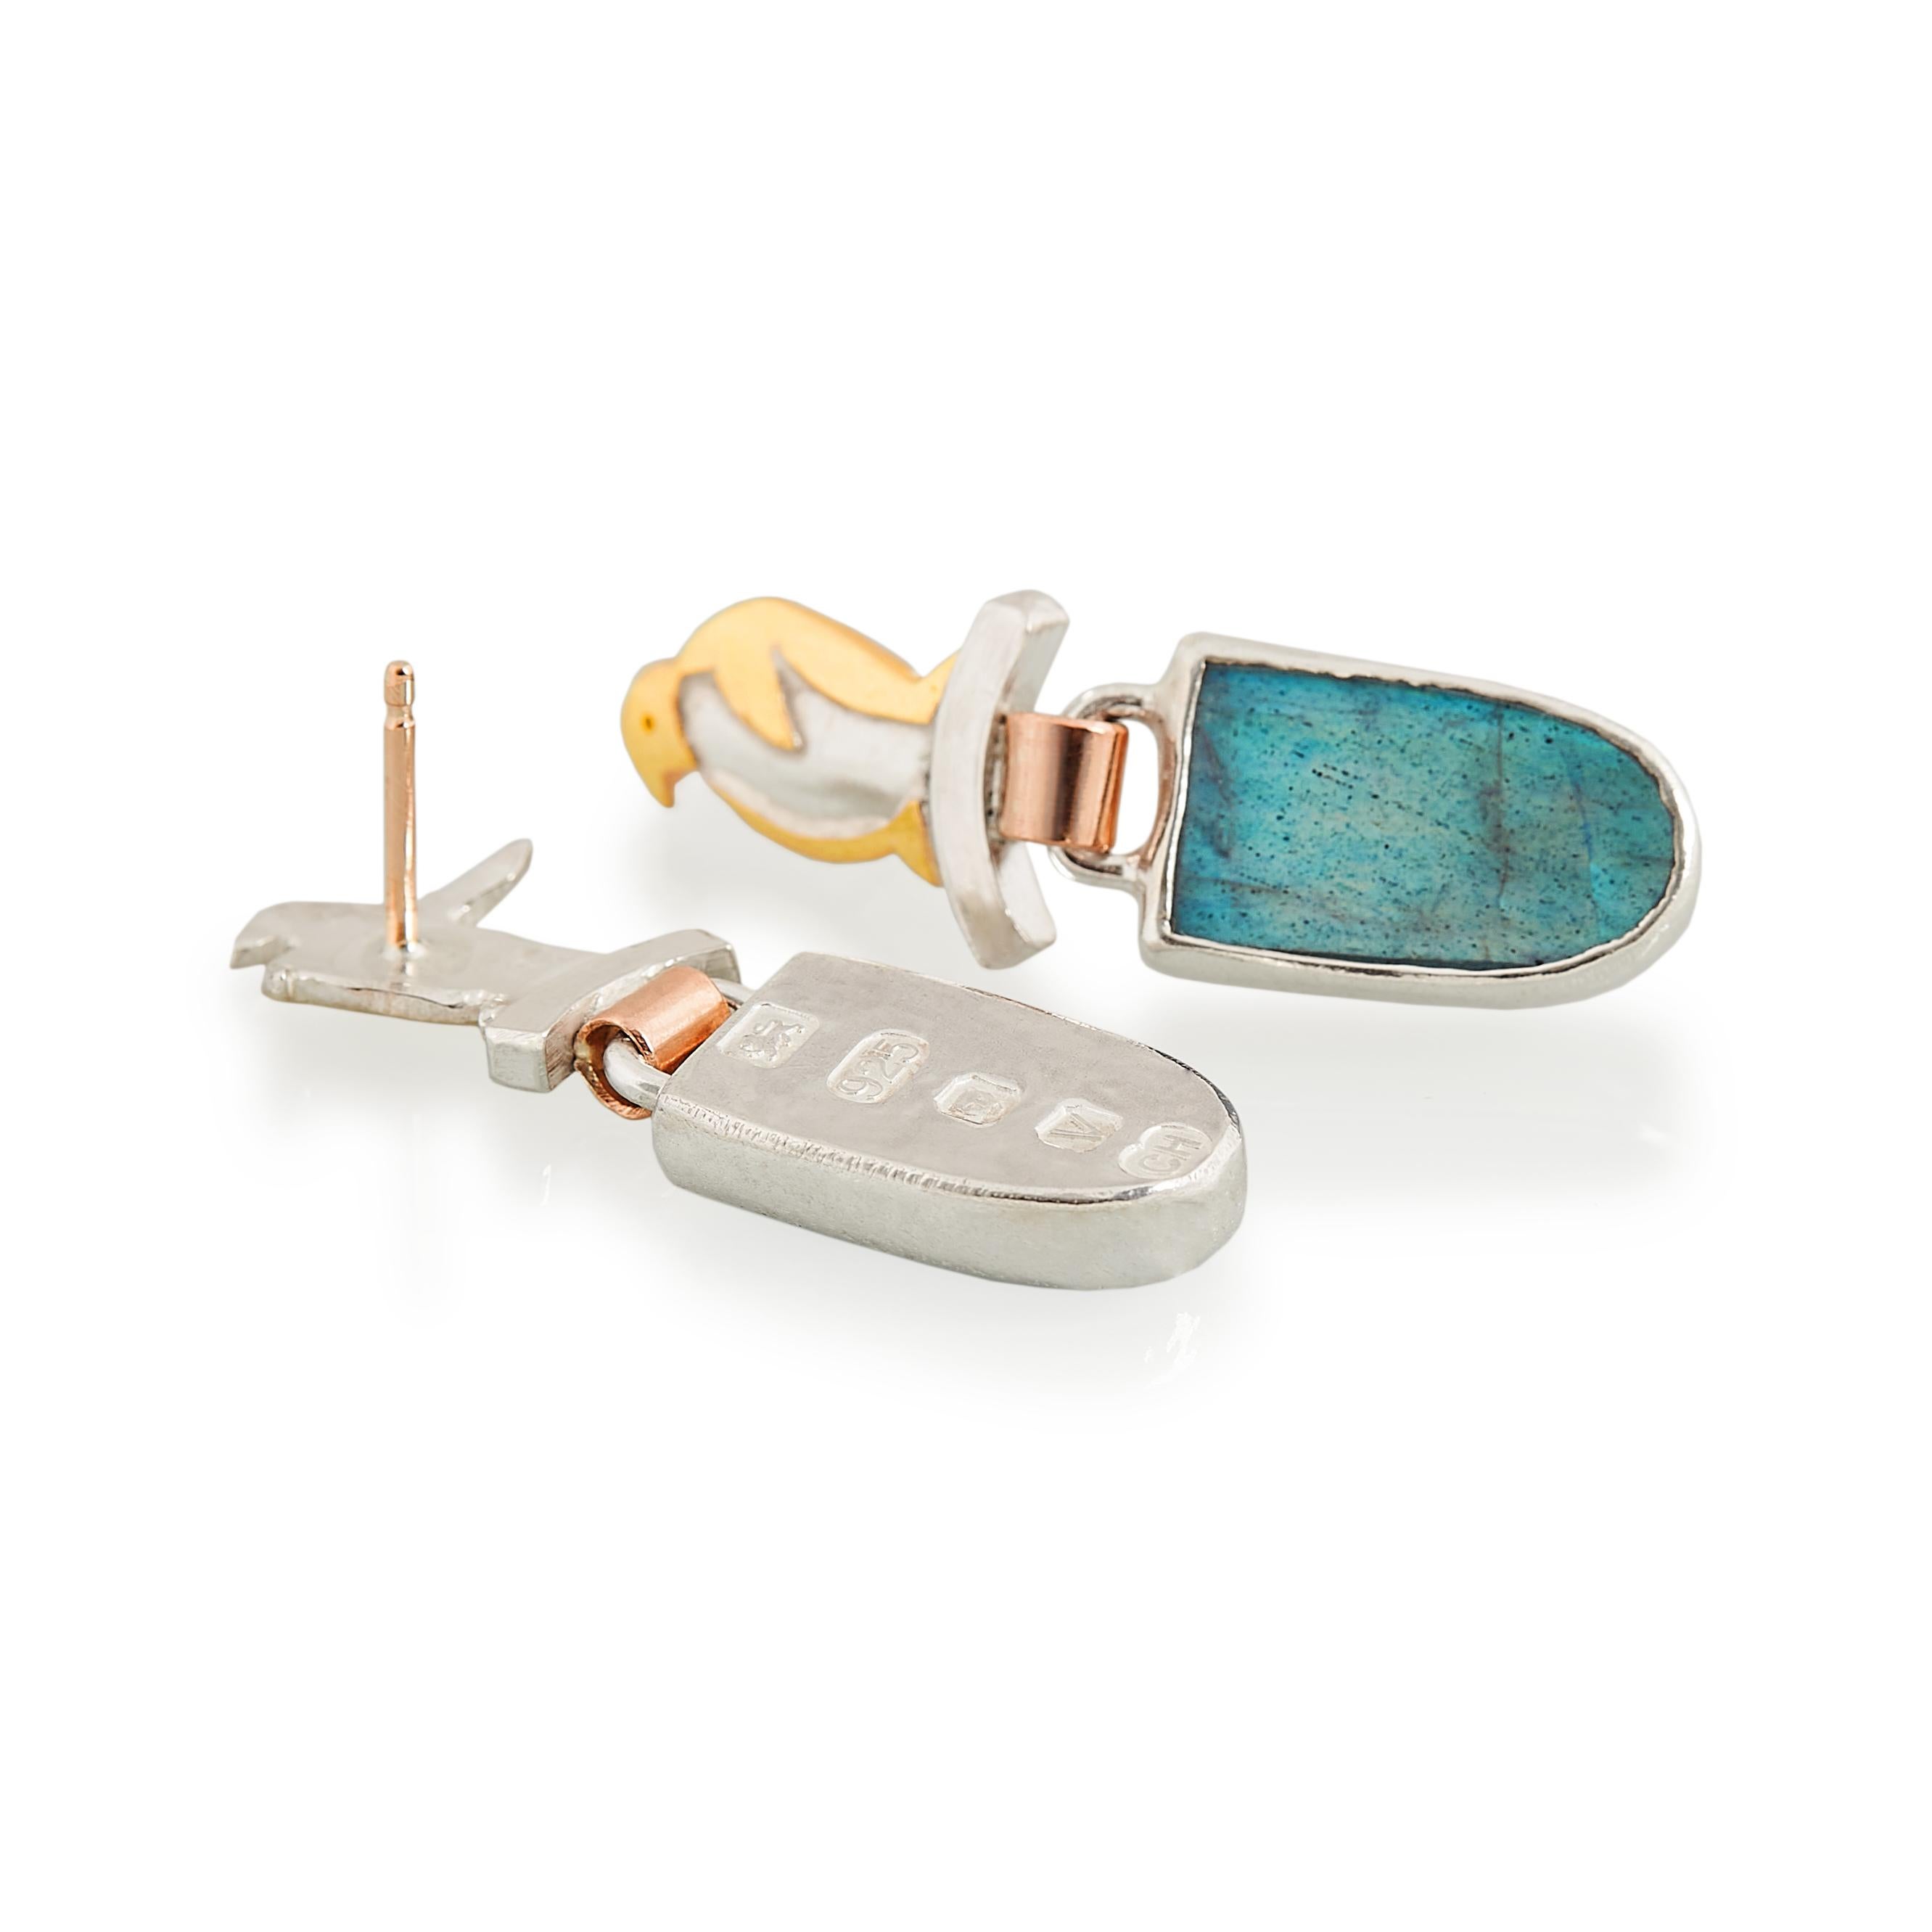 Charming sterling silver penguin drop earrings with 22 karat gold details and 9 karat gold links and posts for people with sensitive ears. The stones are labradorite which have a beautiful light blue flash. They are stamped on the backs with large